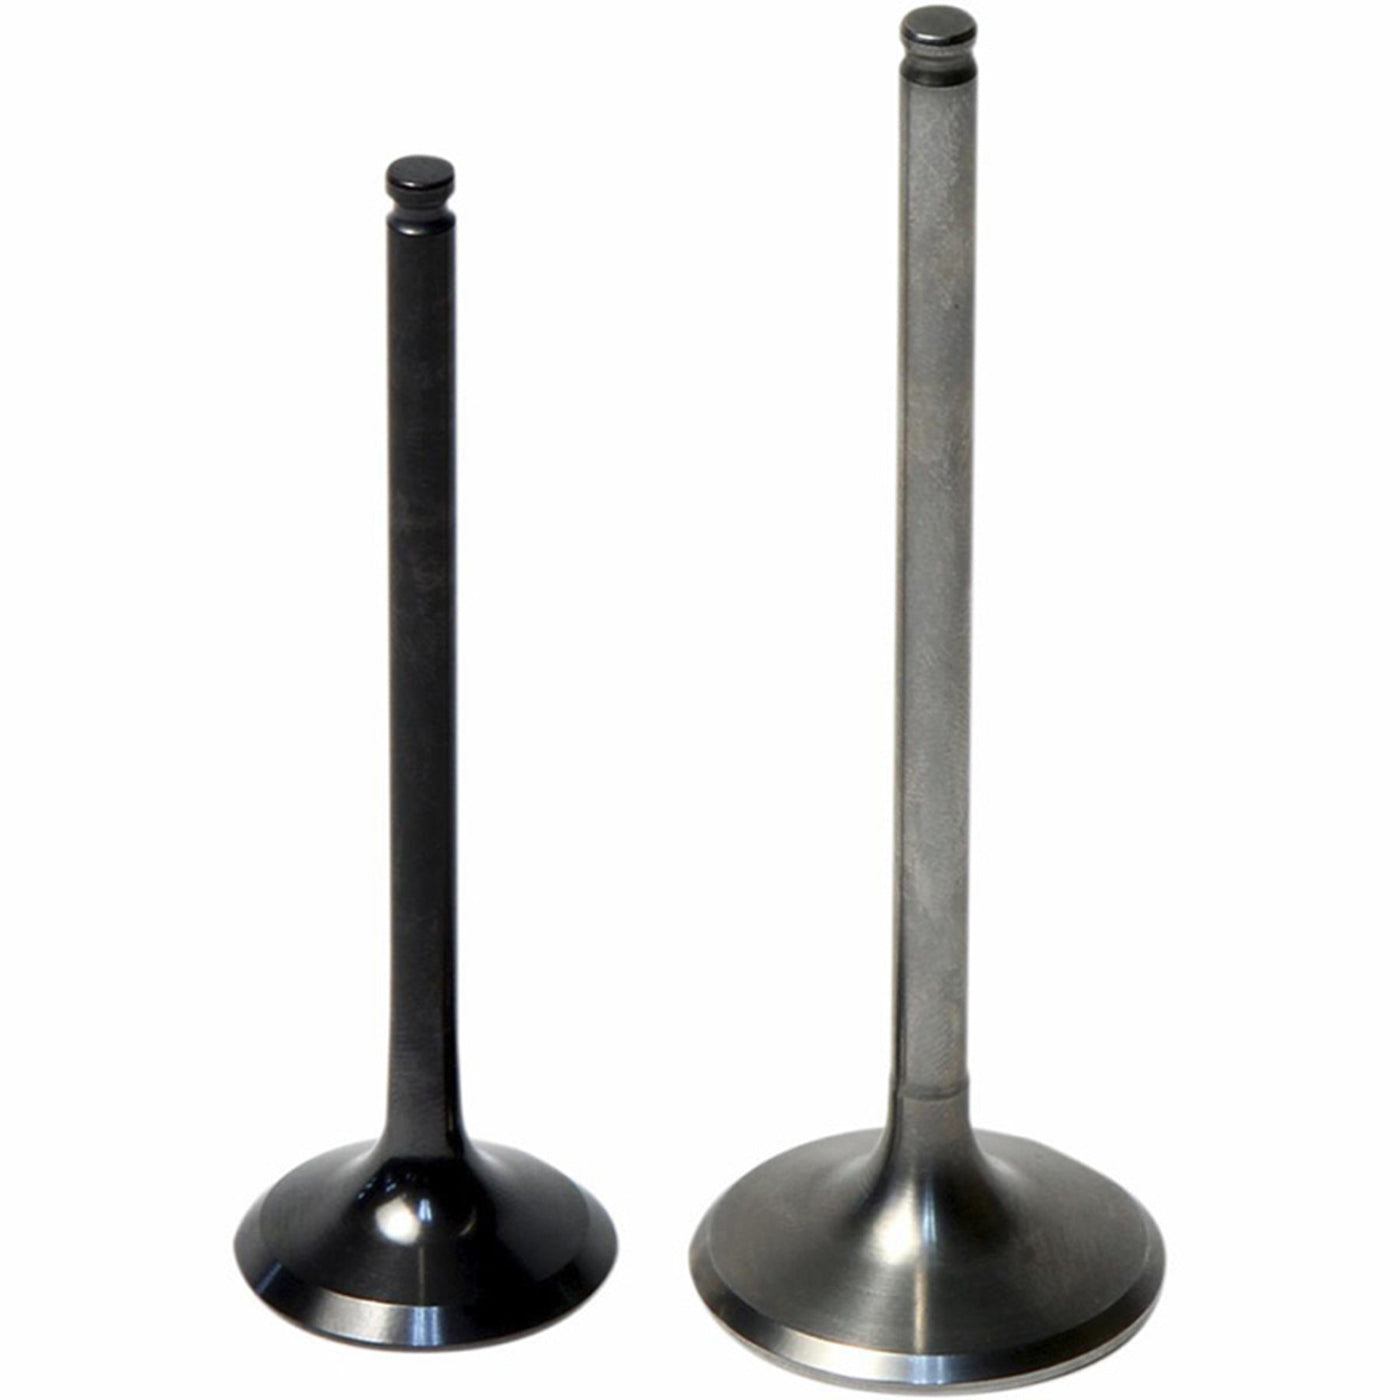 Hotcams 8400011-1 Intake and Exhaust Valves #8400011-1